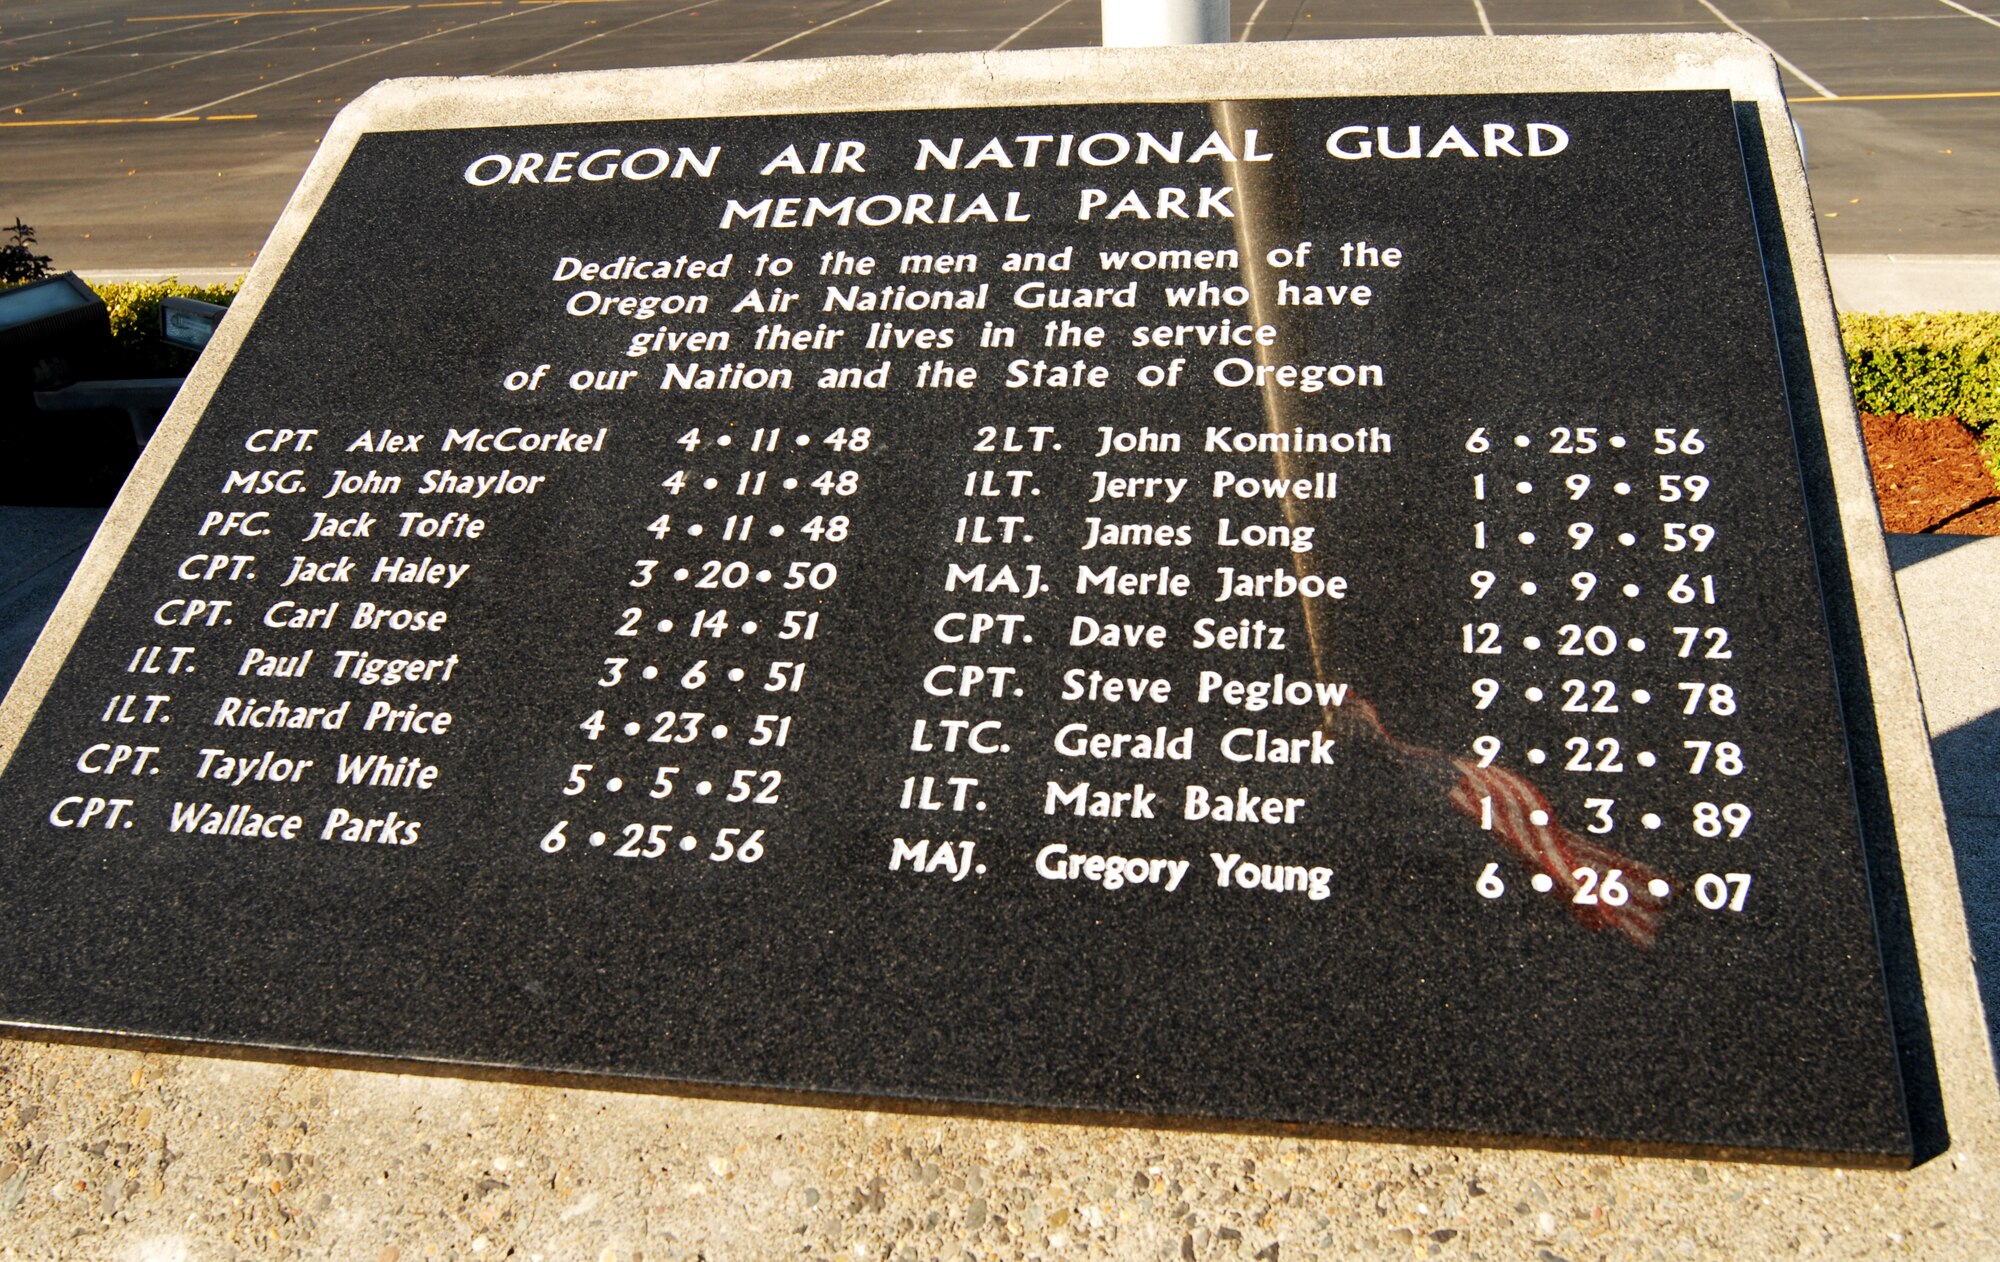 The Oregon Air National Guard’s Memorial Park at the Portland Air NationalGuard Base, Portland, Ore., honors the postwar service losses of Oregon’s Air National Guardsmen.  The Air Guardsmen named in this memorial article are the first three names on the list, though we honor all on Memorial Day. (Air National Guard photo by Tech. Sgt. John Hughel, 142nd Fighter Wing Public Affairs)